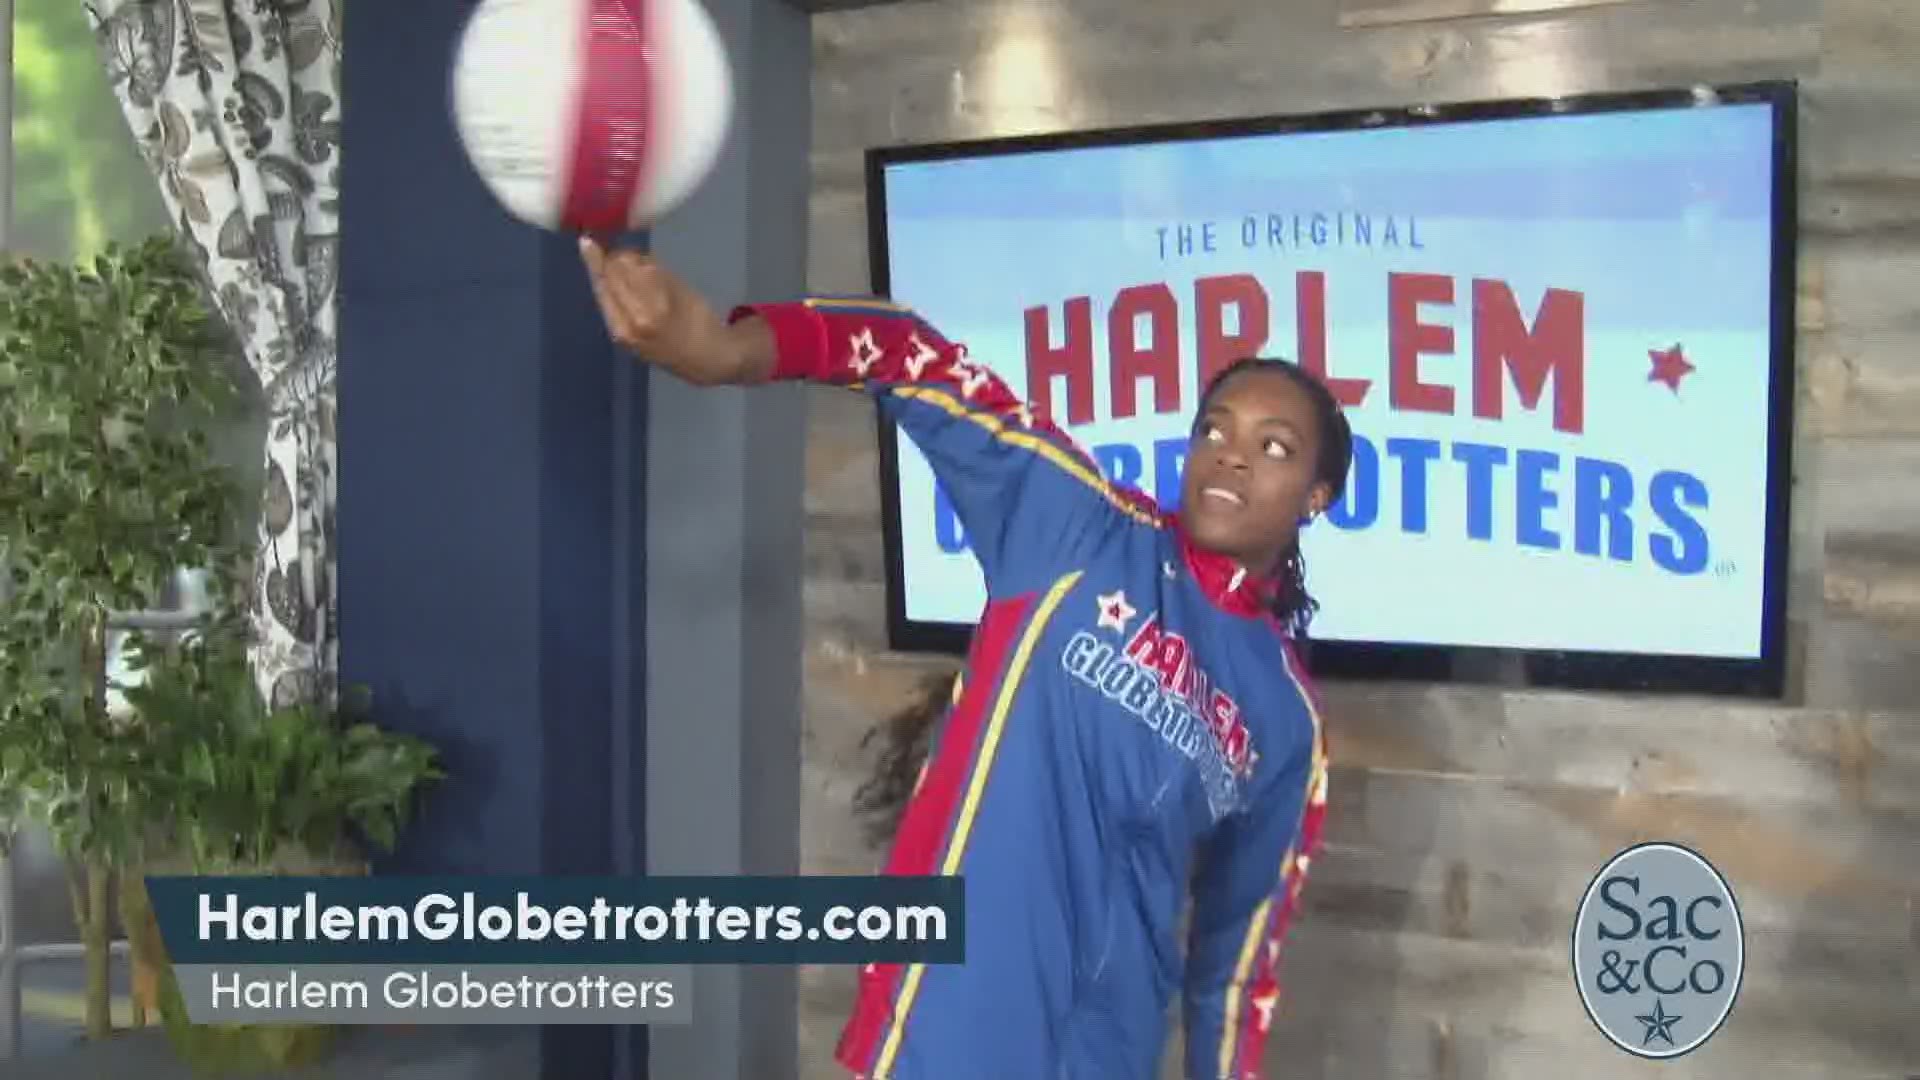 The Harlem Globetrotters are headed to the Golden 1 Center with their basketball wizardry skills! (Aired on January 7, 2019)